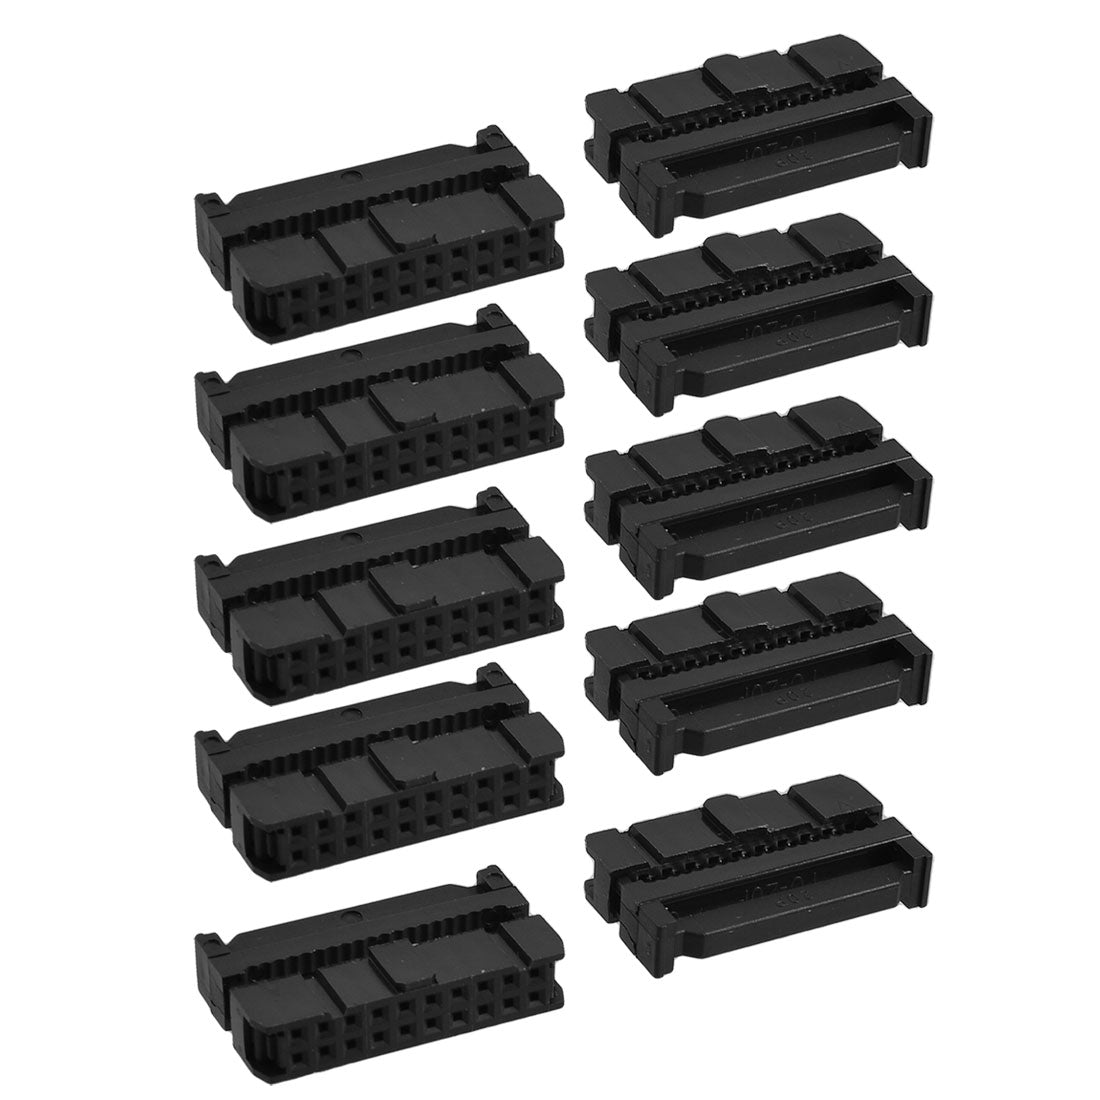 uxcell Uxcell 10 Pcs 2.54mm Pitch Female 20 Pin Flat Cable IDC Socket Connector Black